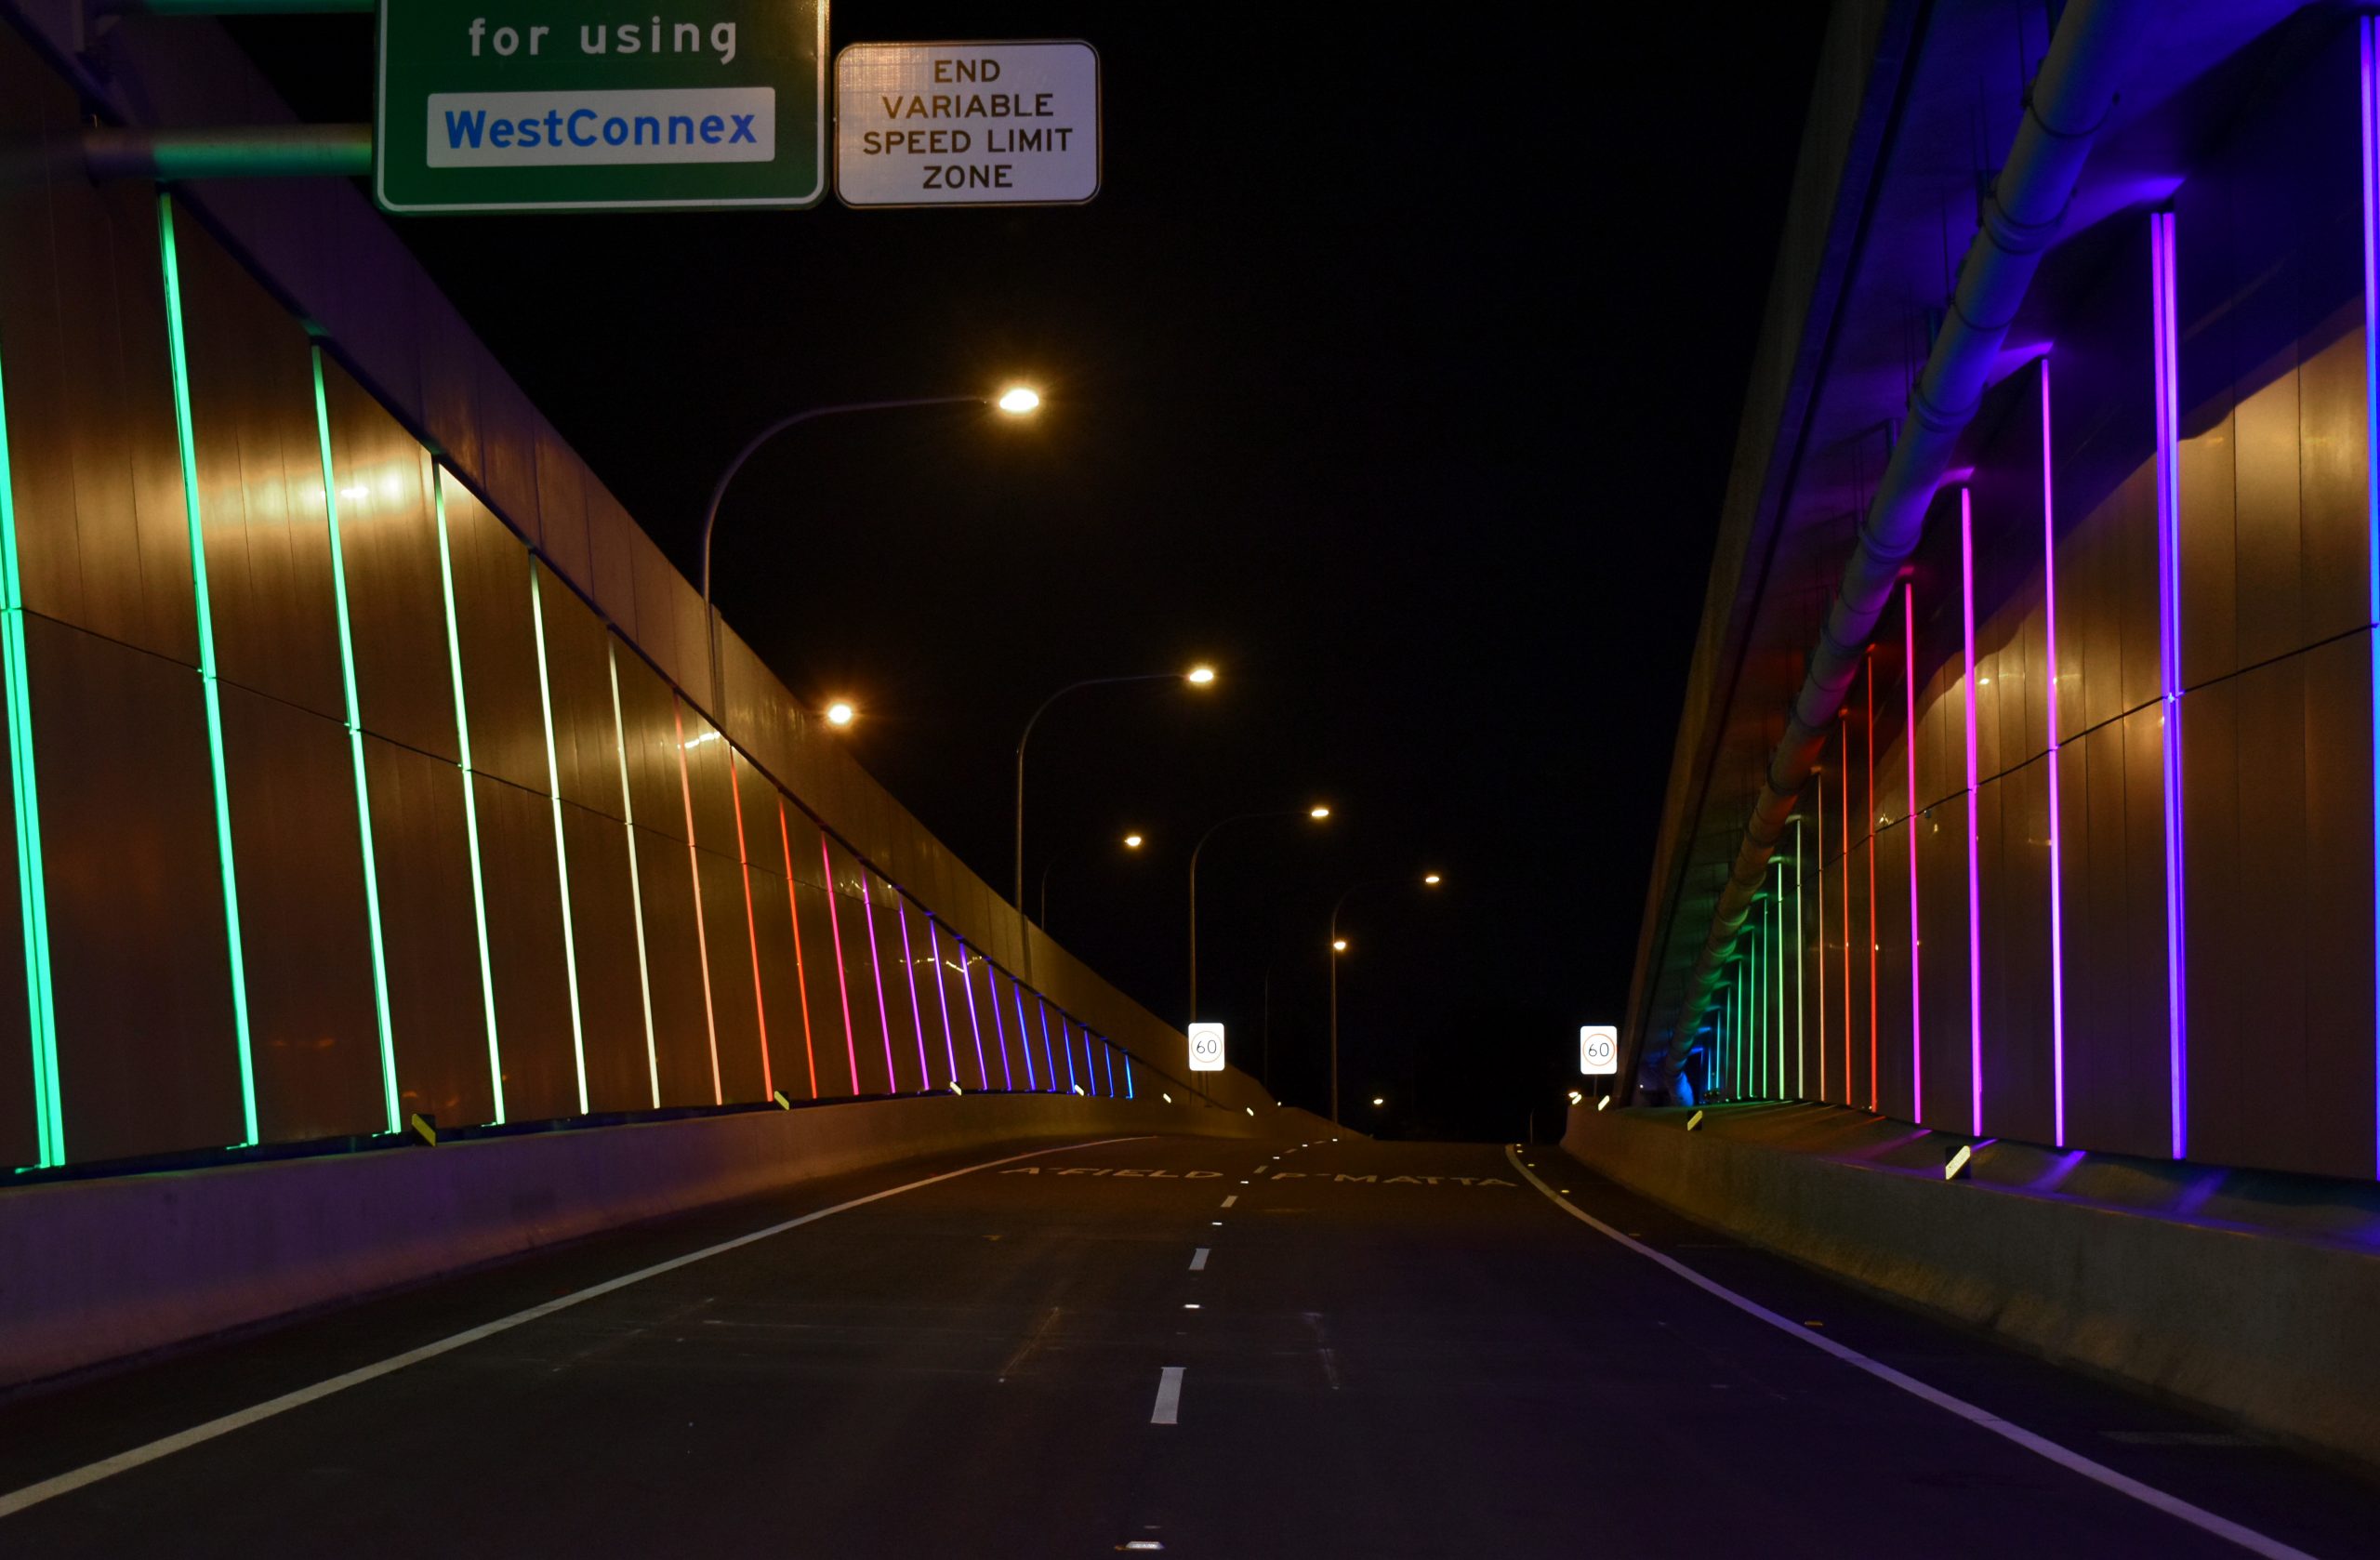 Side walls of WestConnex link are lit up rainbow thanks to wattle dives programmed with smart lighting control on a pharos system